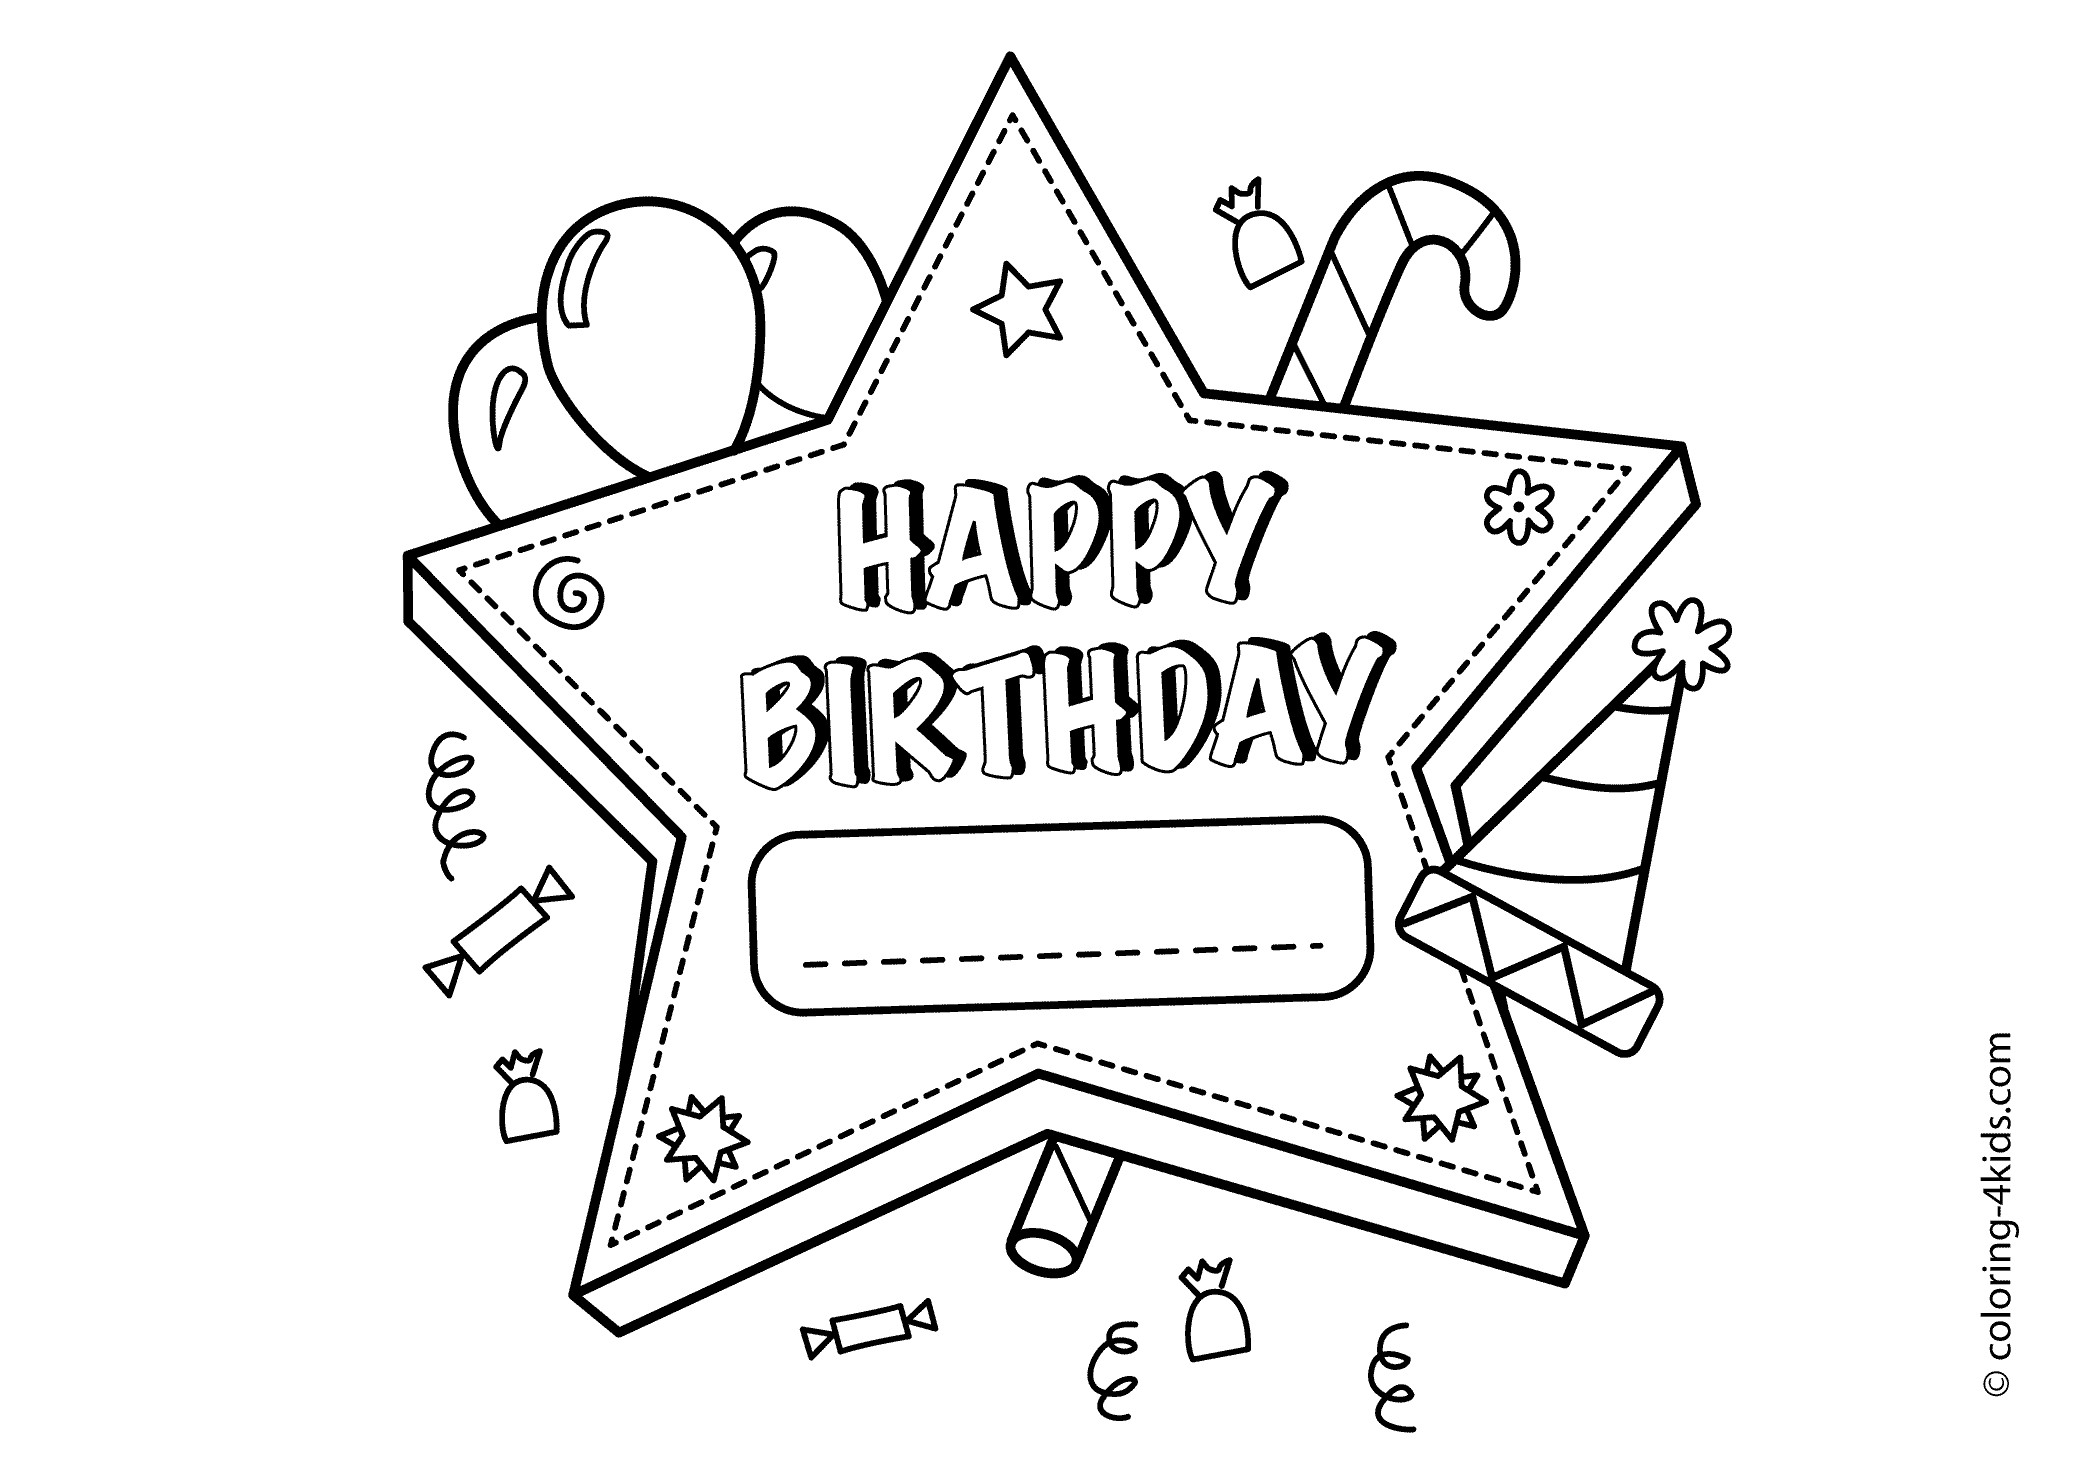 Happy Birthday Coloring Pages For Boys
 Happy birthday printable star – coloring pages for kids